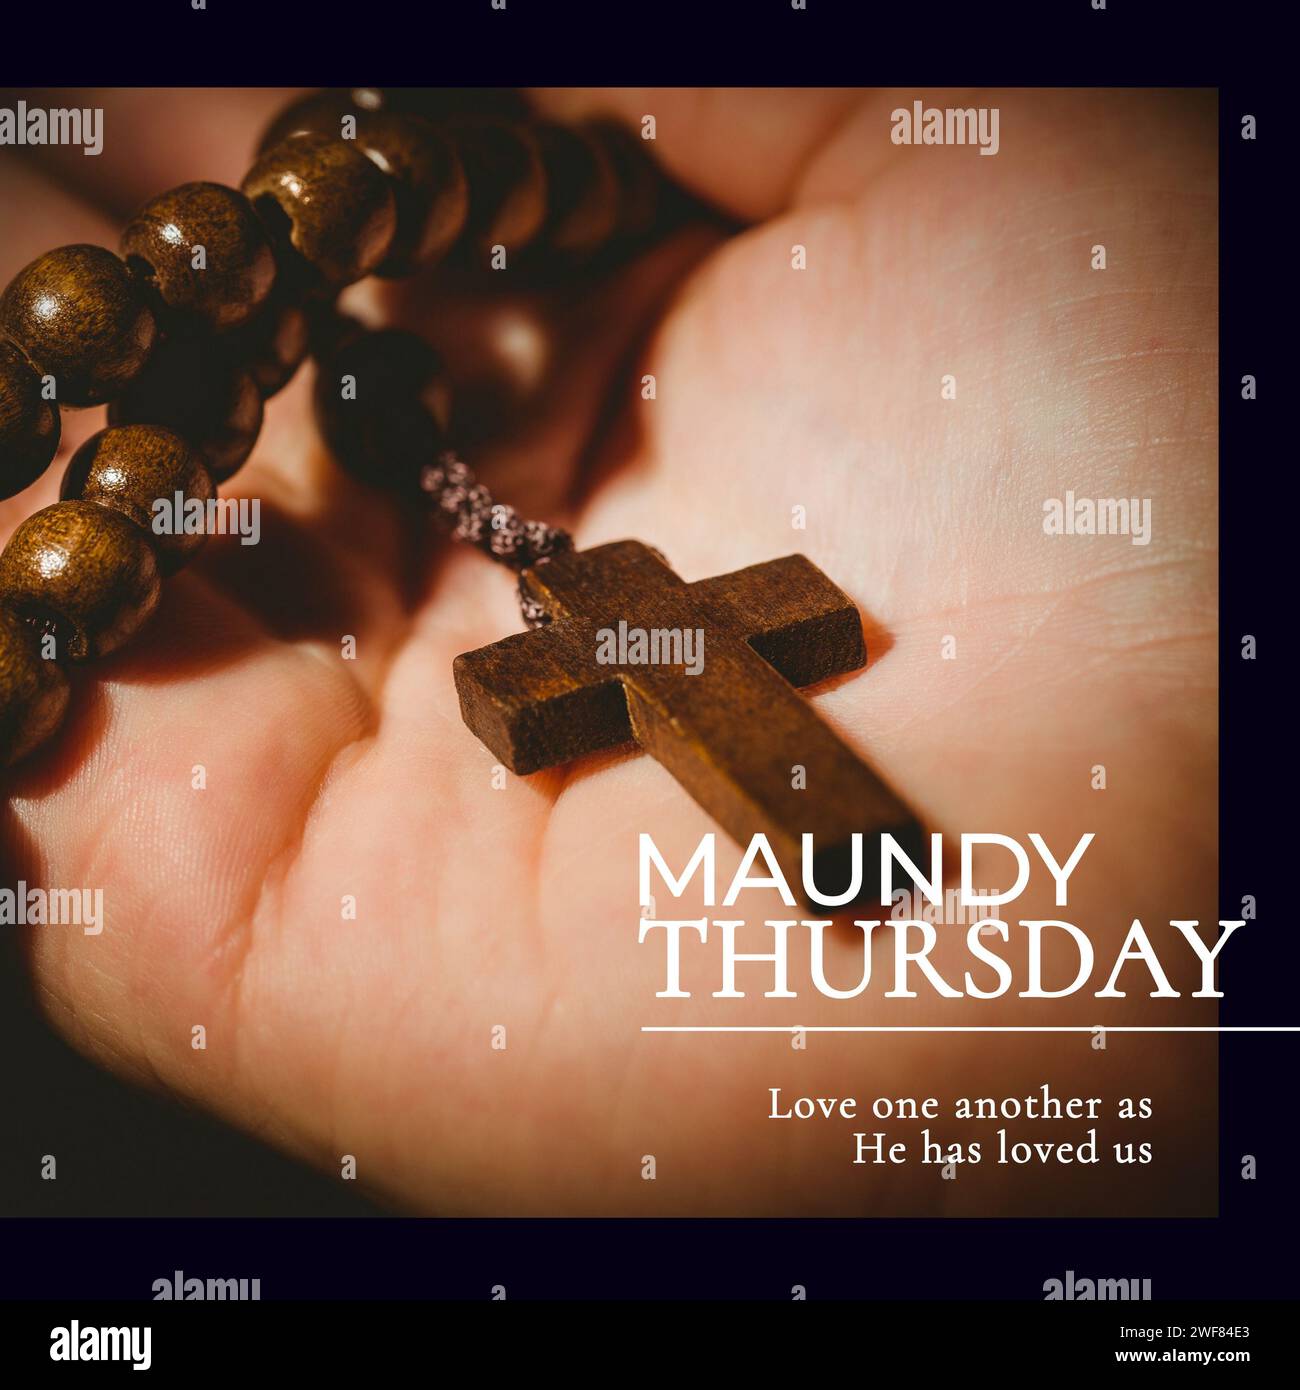 Composition of maundy thursday text over hand holding rosary Stock Photo